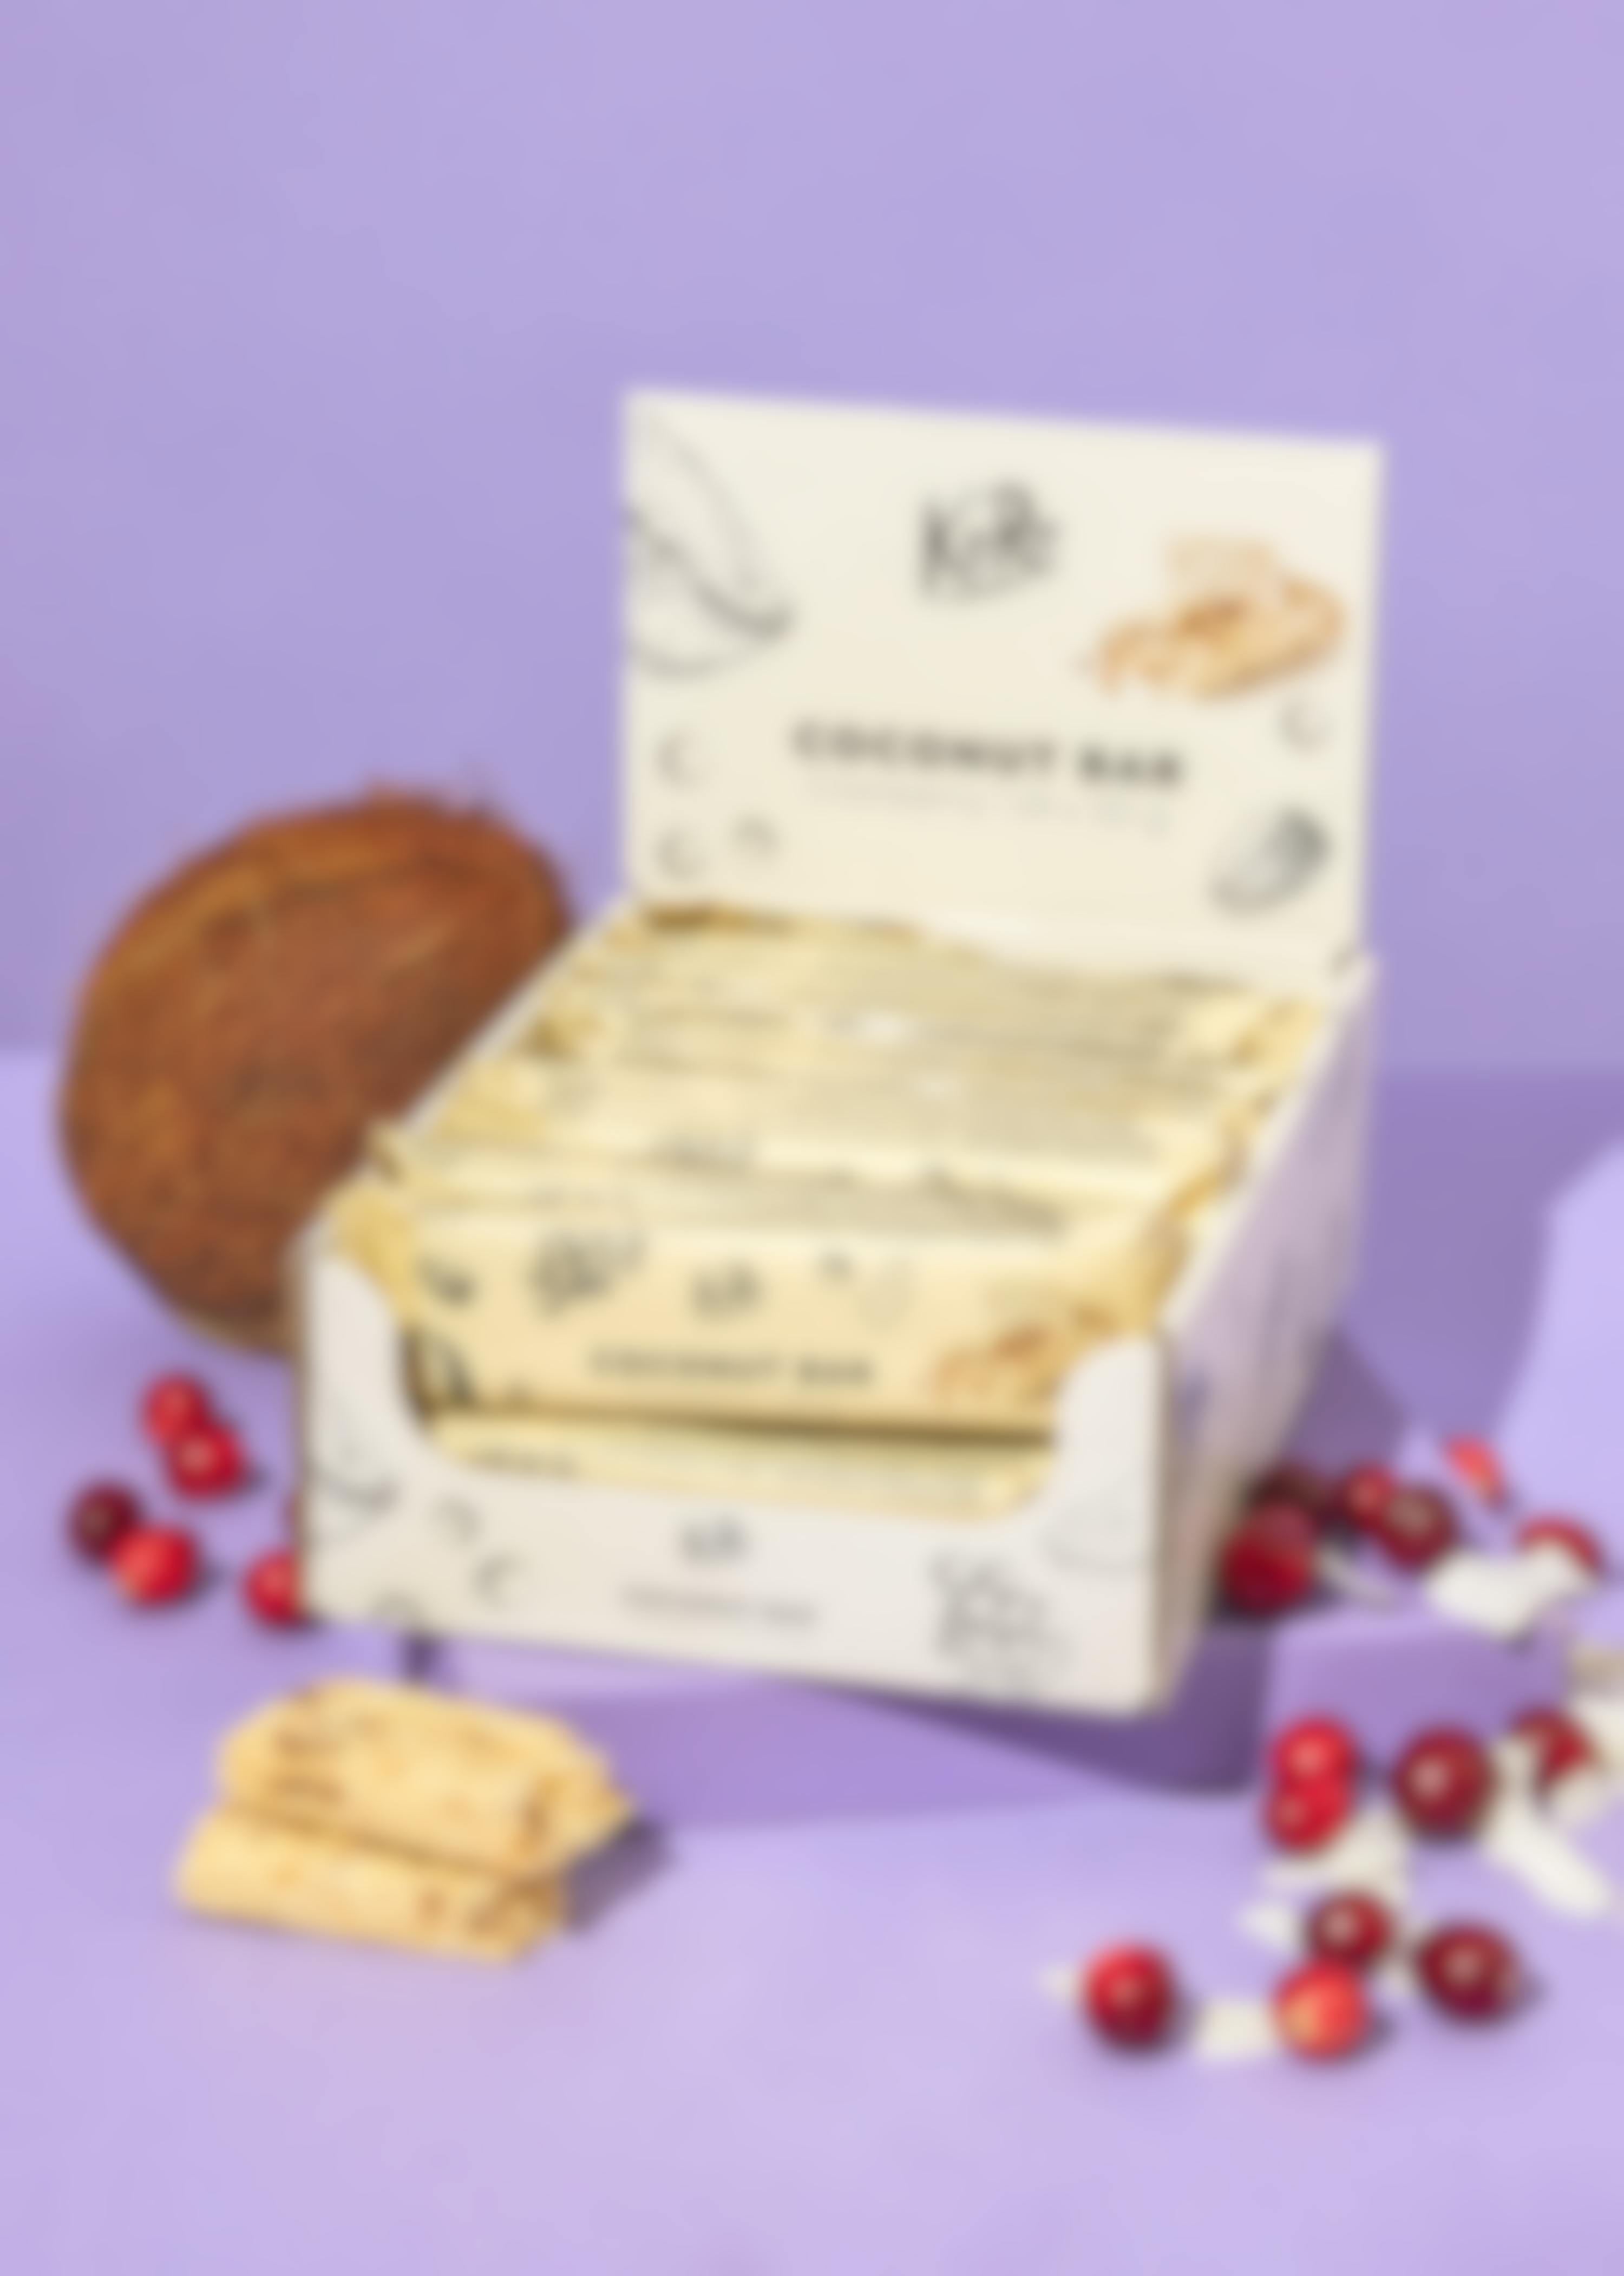 Organic coconut and cranberry bar 24 x 30g